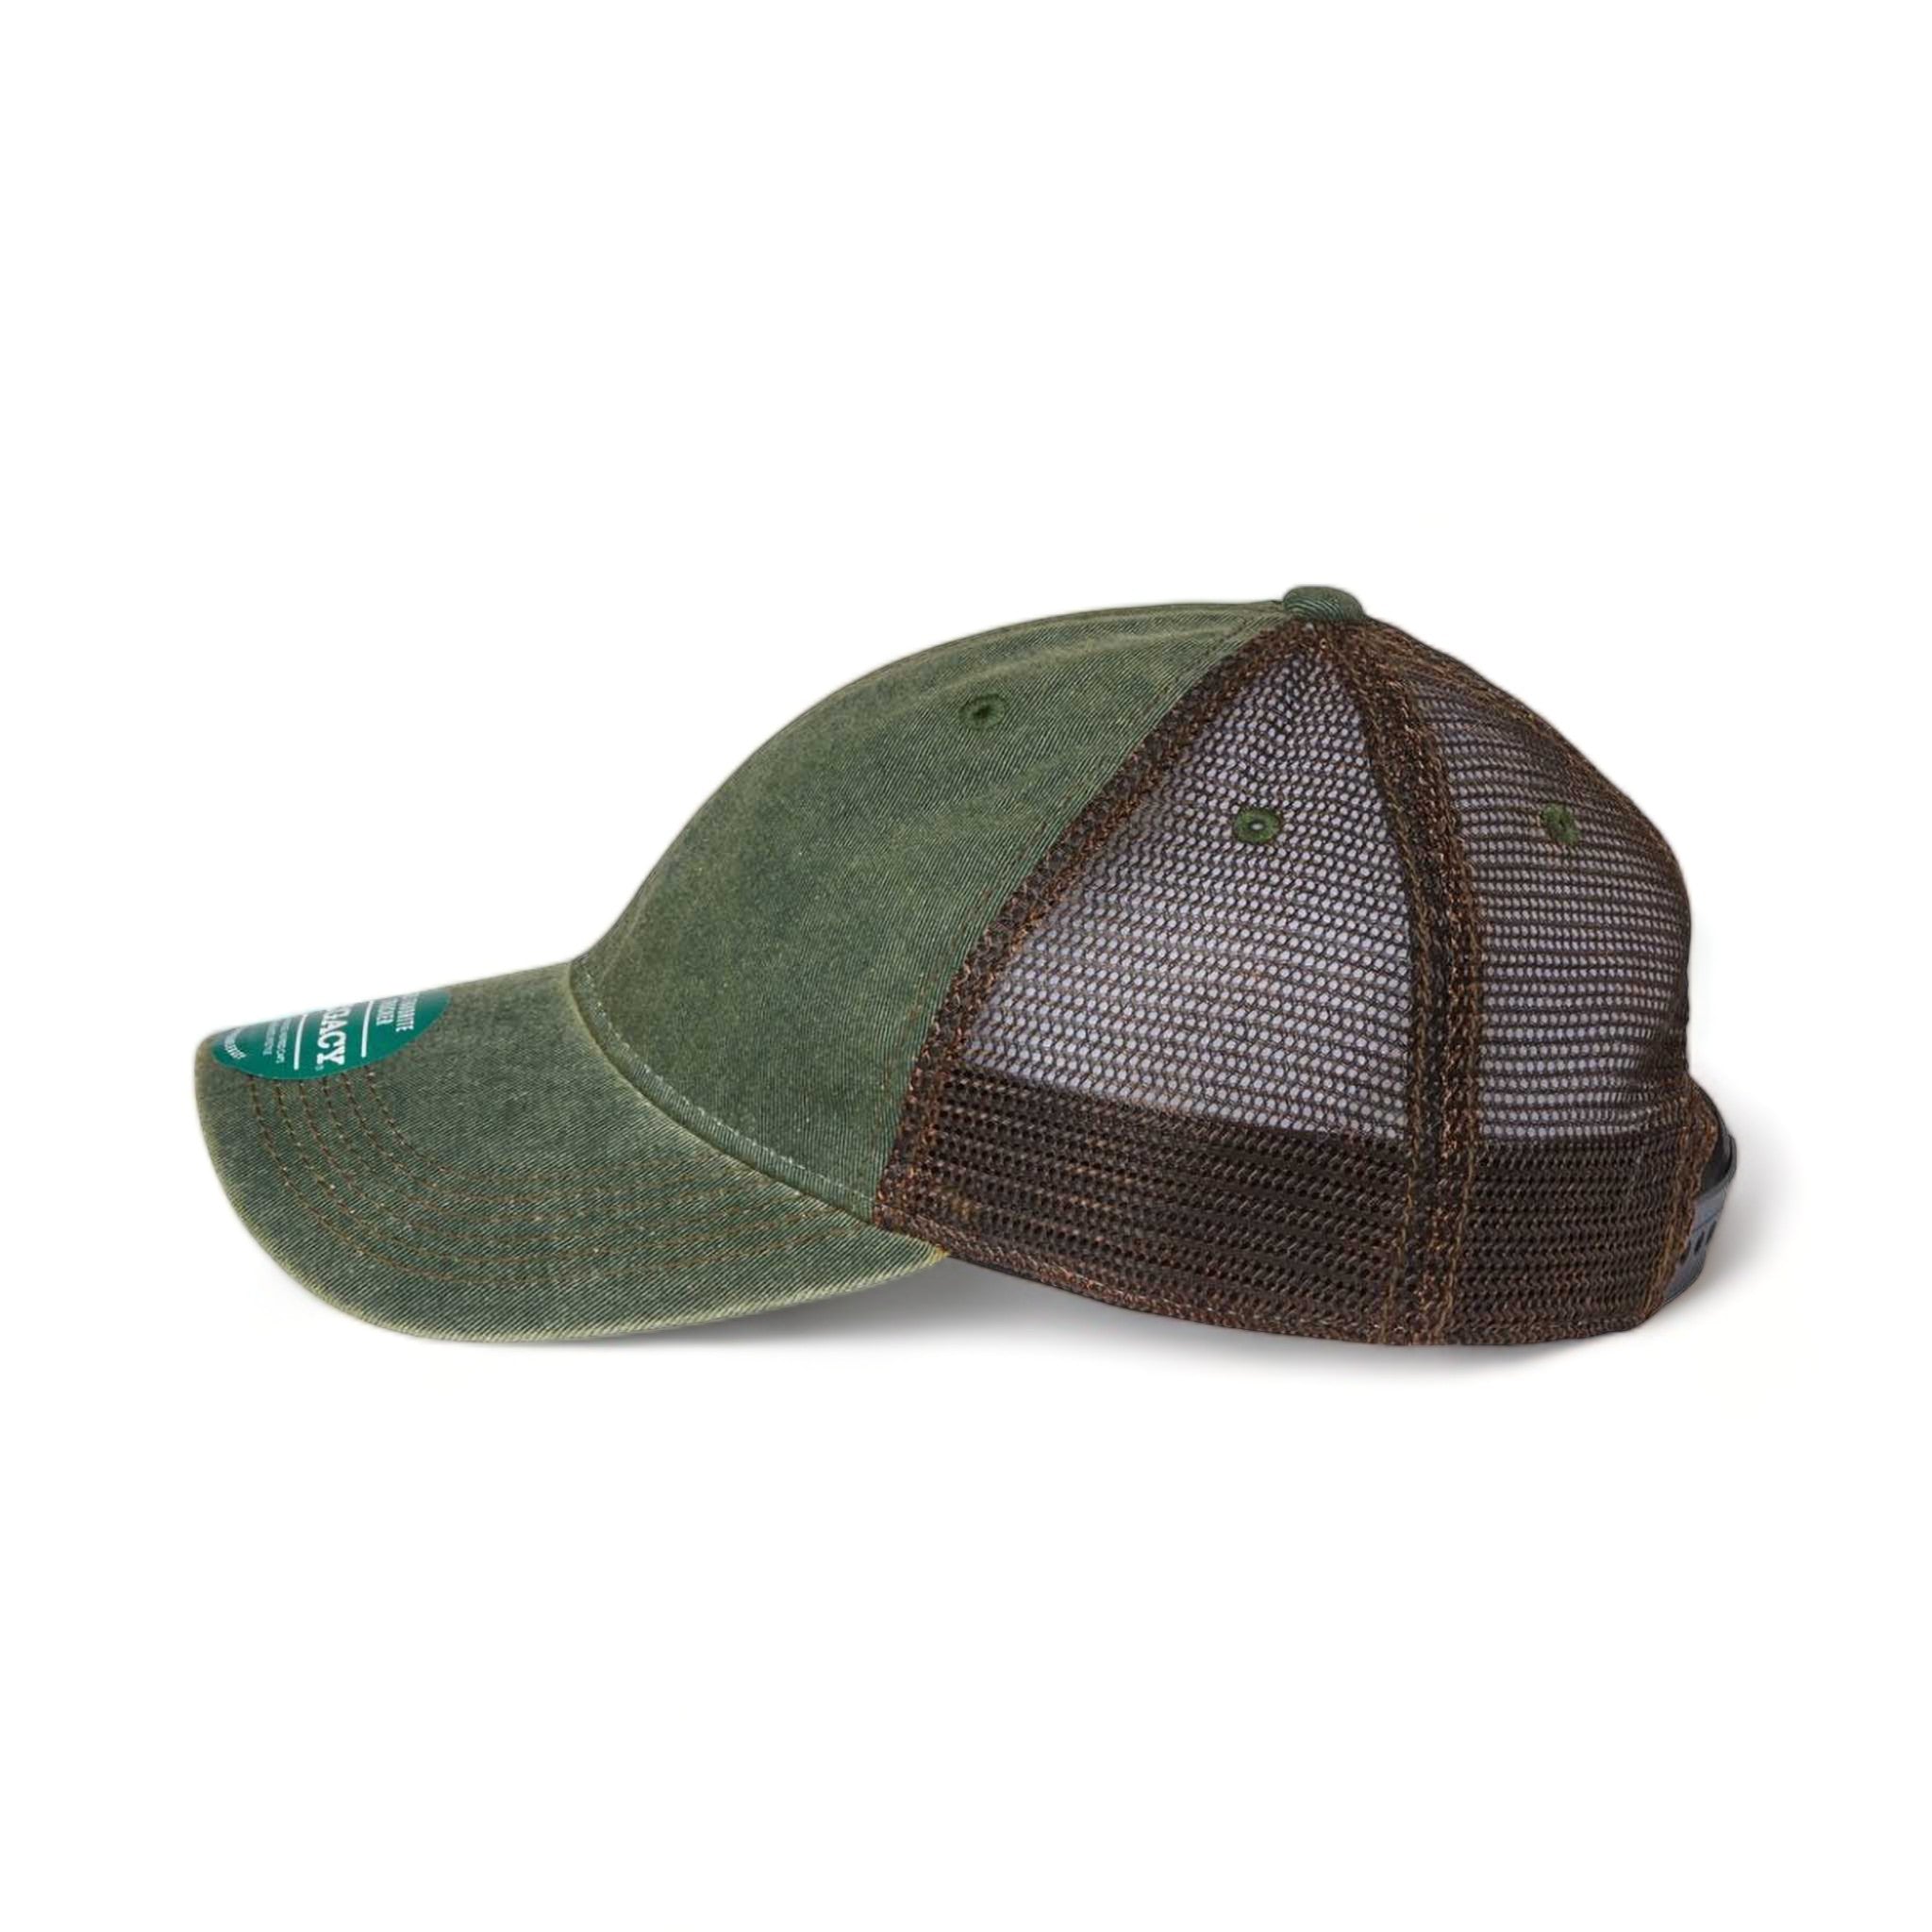 Side view of LEGACY OFA custom hat in green and brown